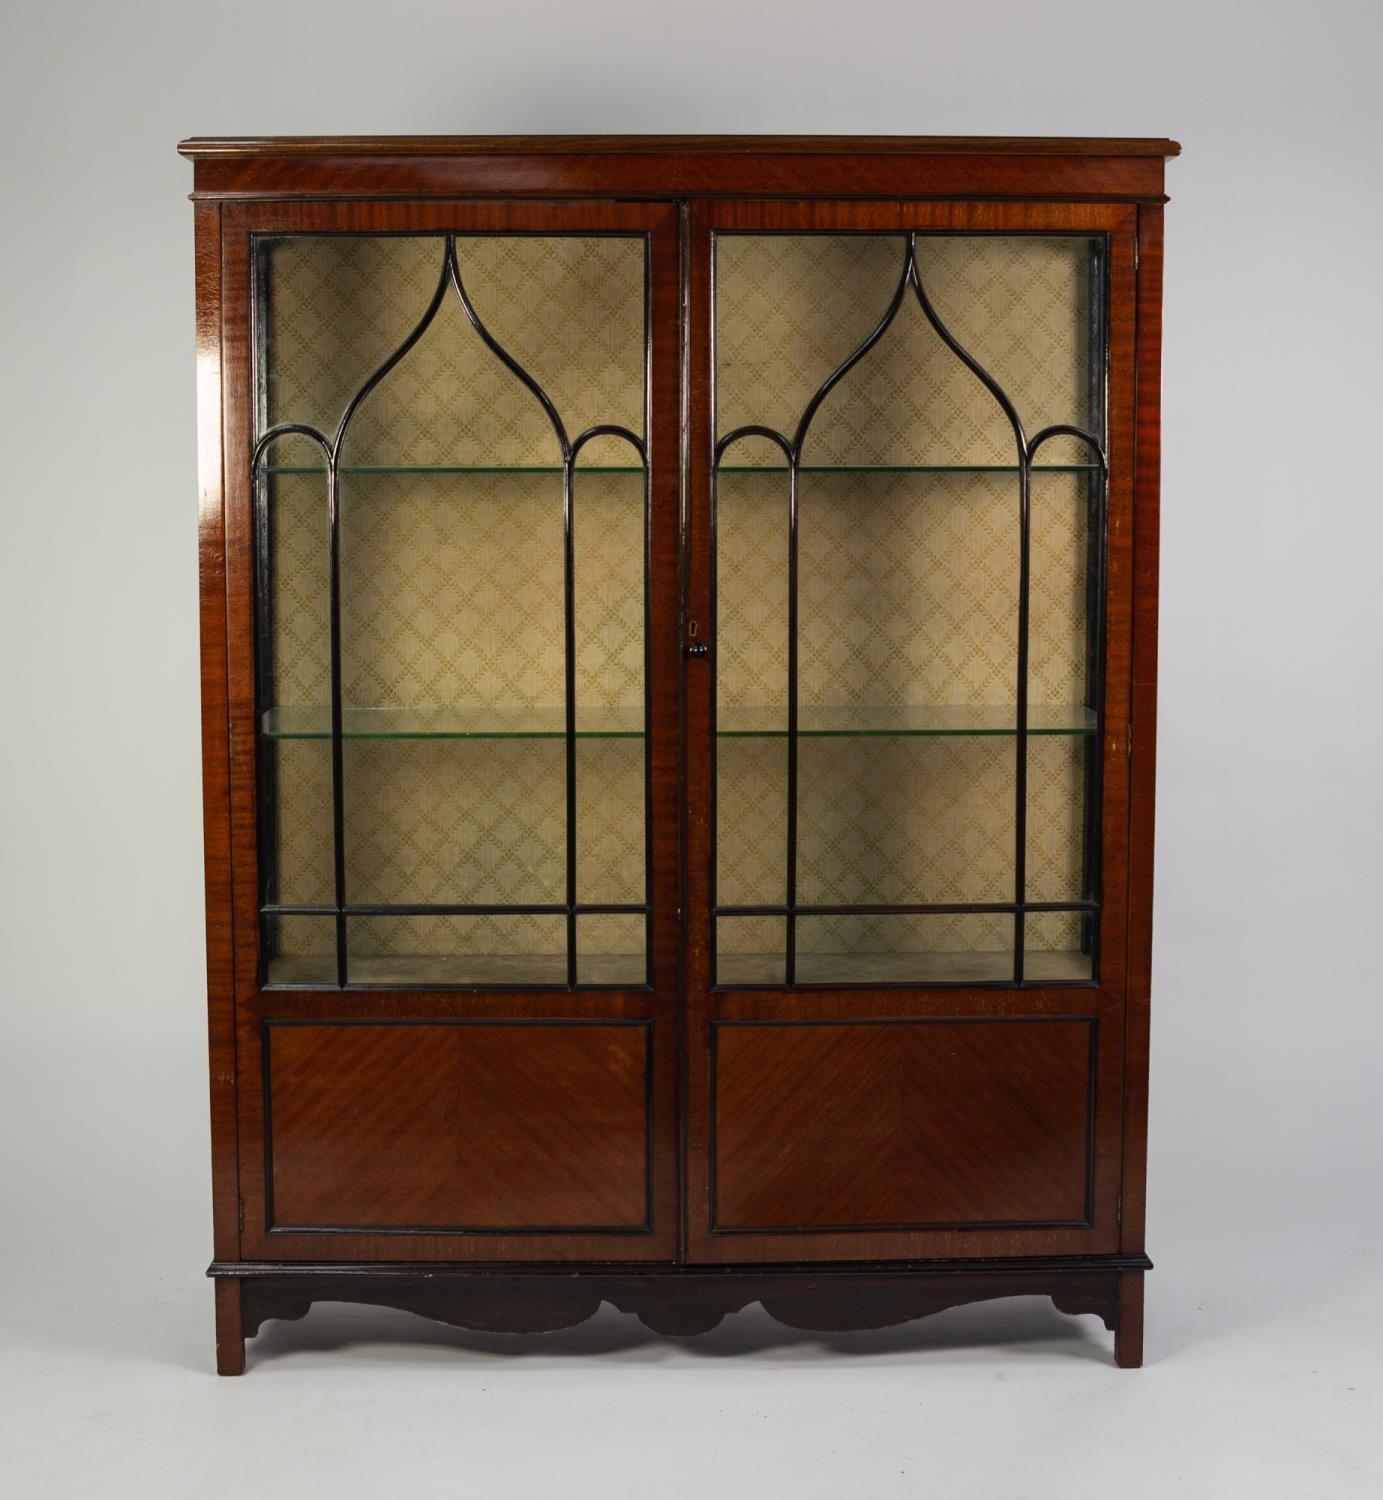 EARLY TWENTIETH CENTURY FIGURED MAHOGANY DISPLAY CABINET, the moulded oblong top above gazed sides